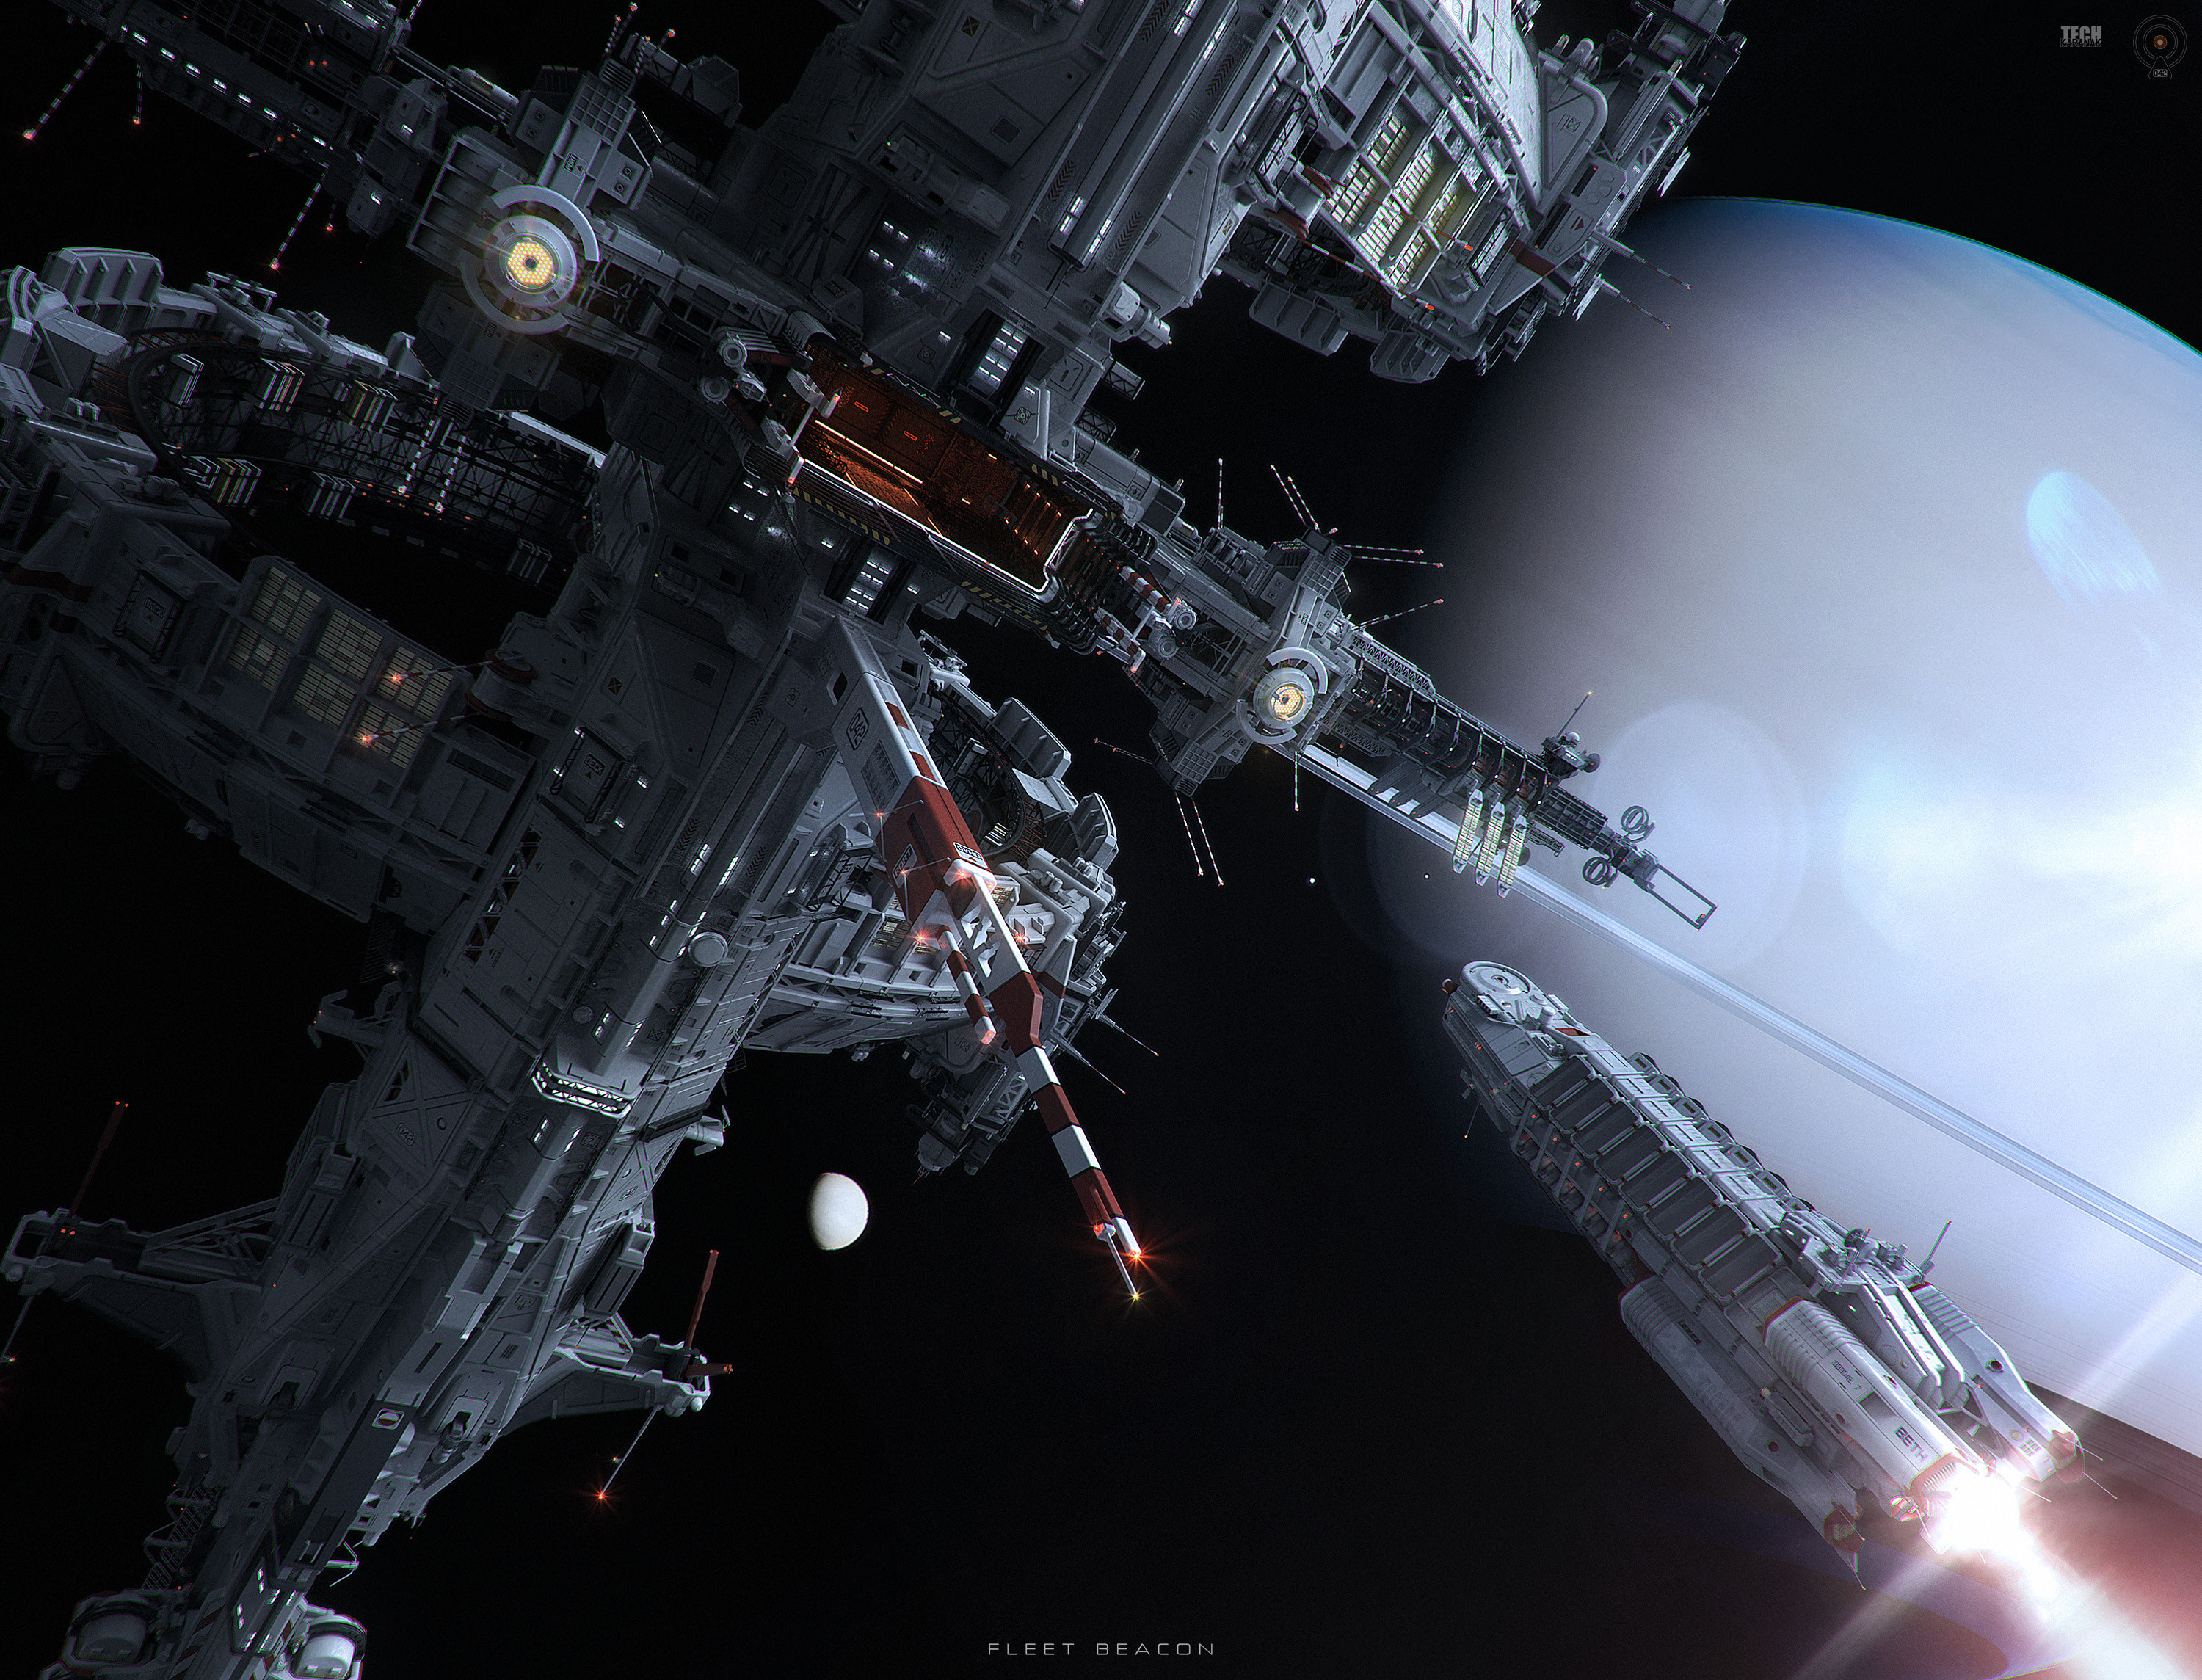 General 3000x2289 space station space planet technology digital art watermarked caption